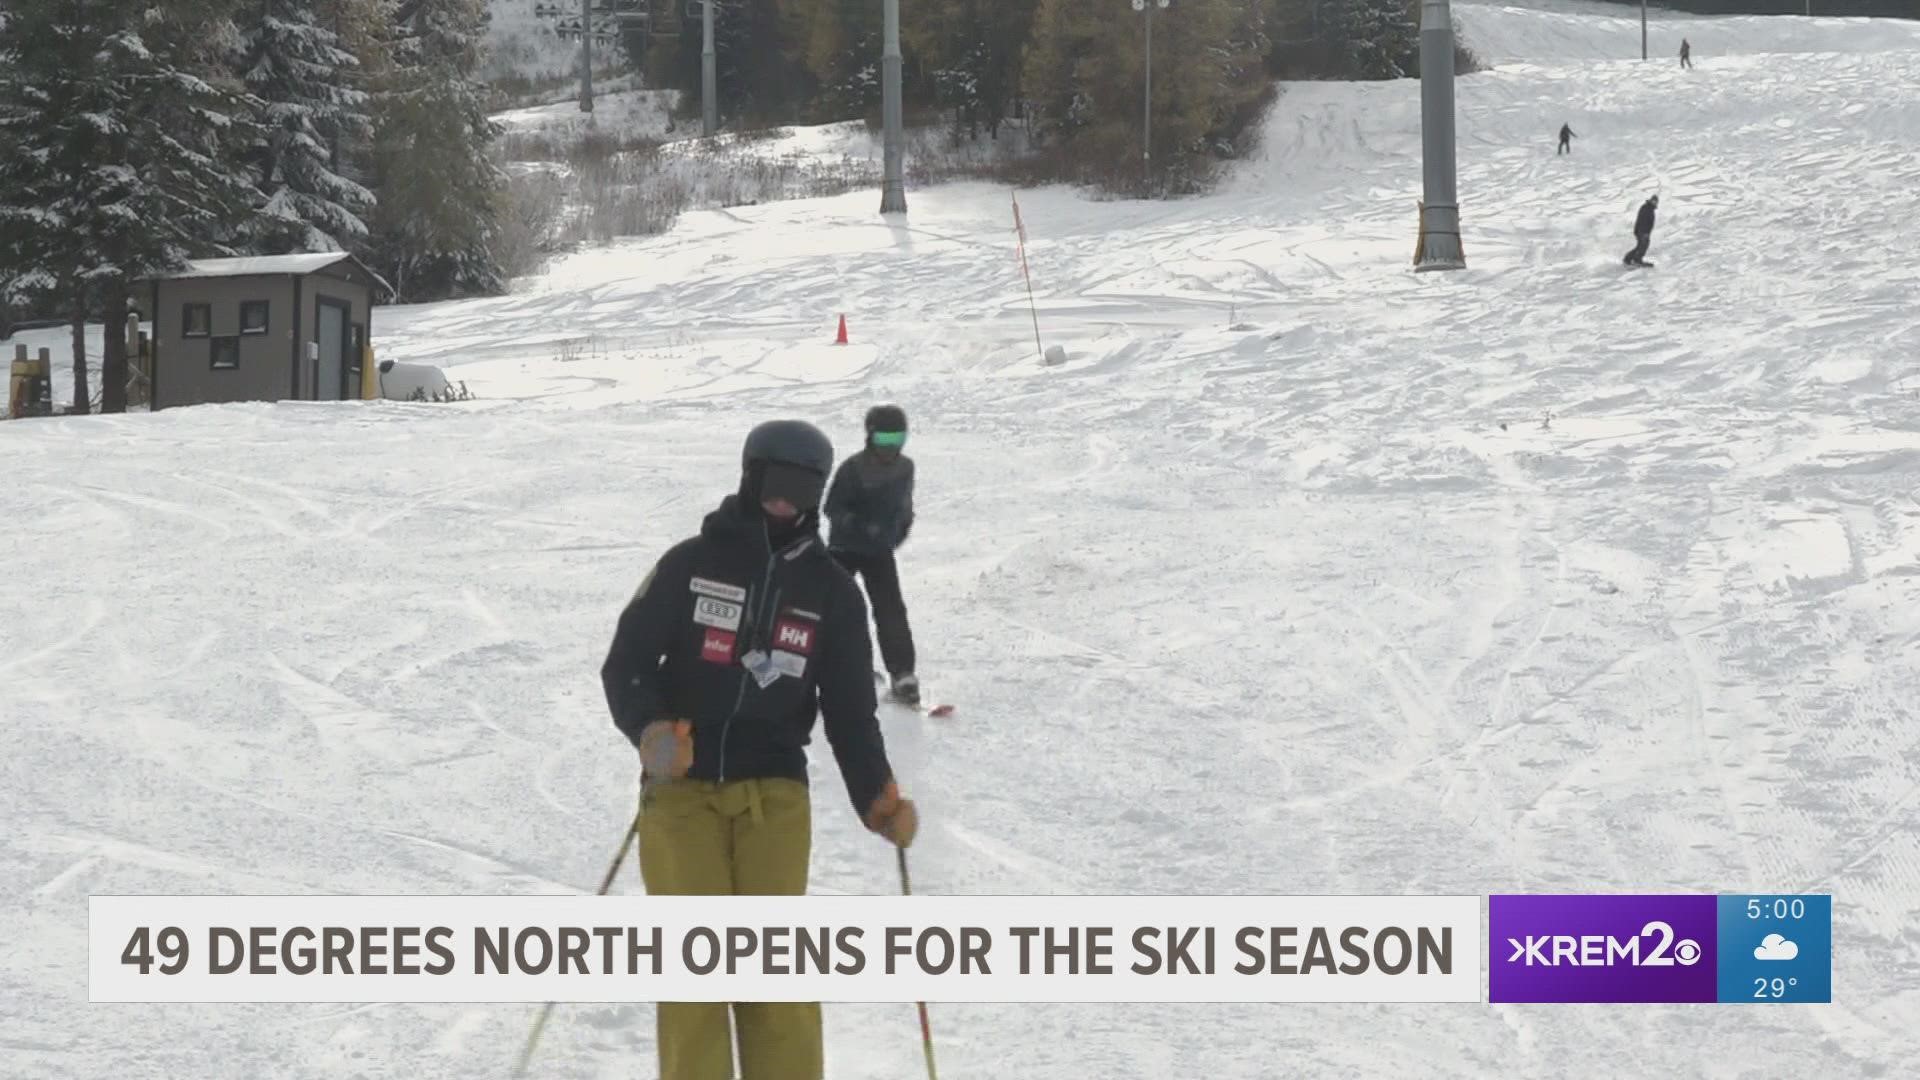 49 Degrees North opened for the season on Friday, the earliest the ski resort has ever opened.